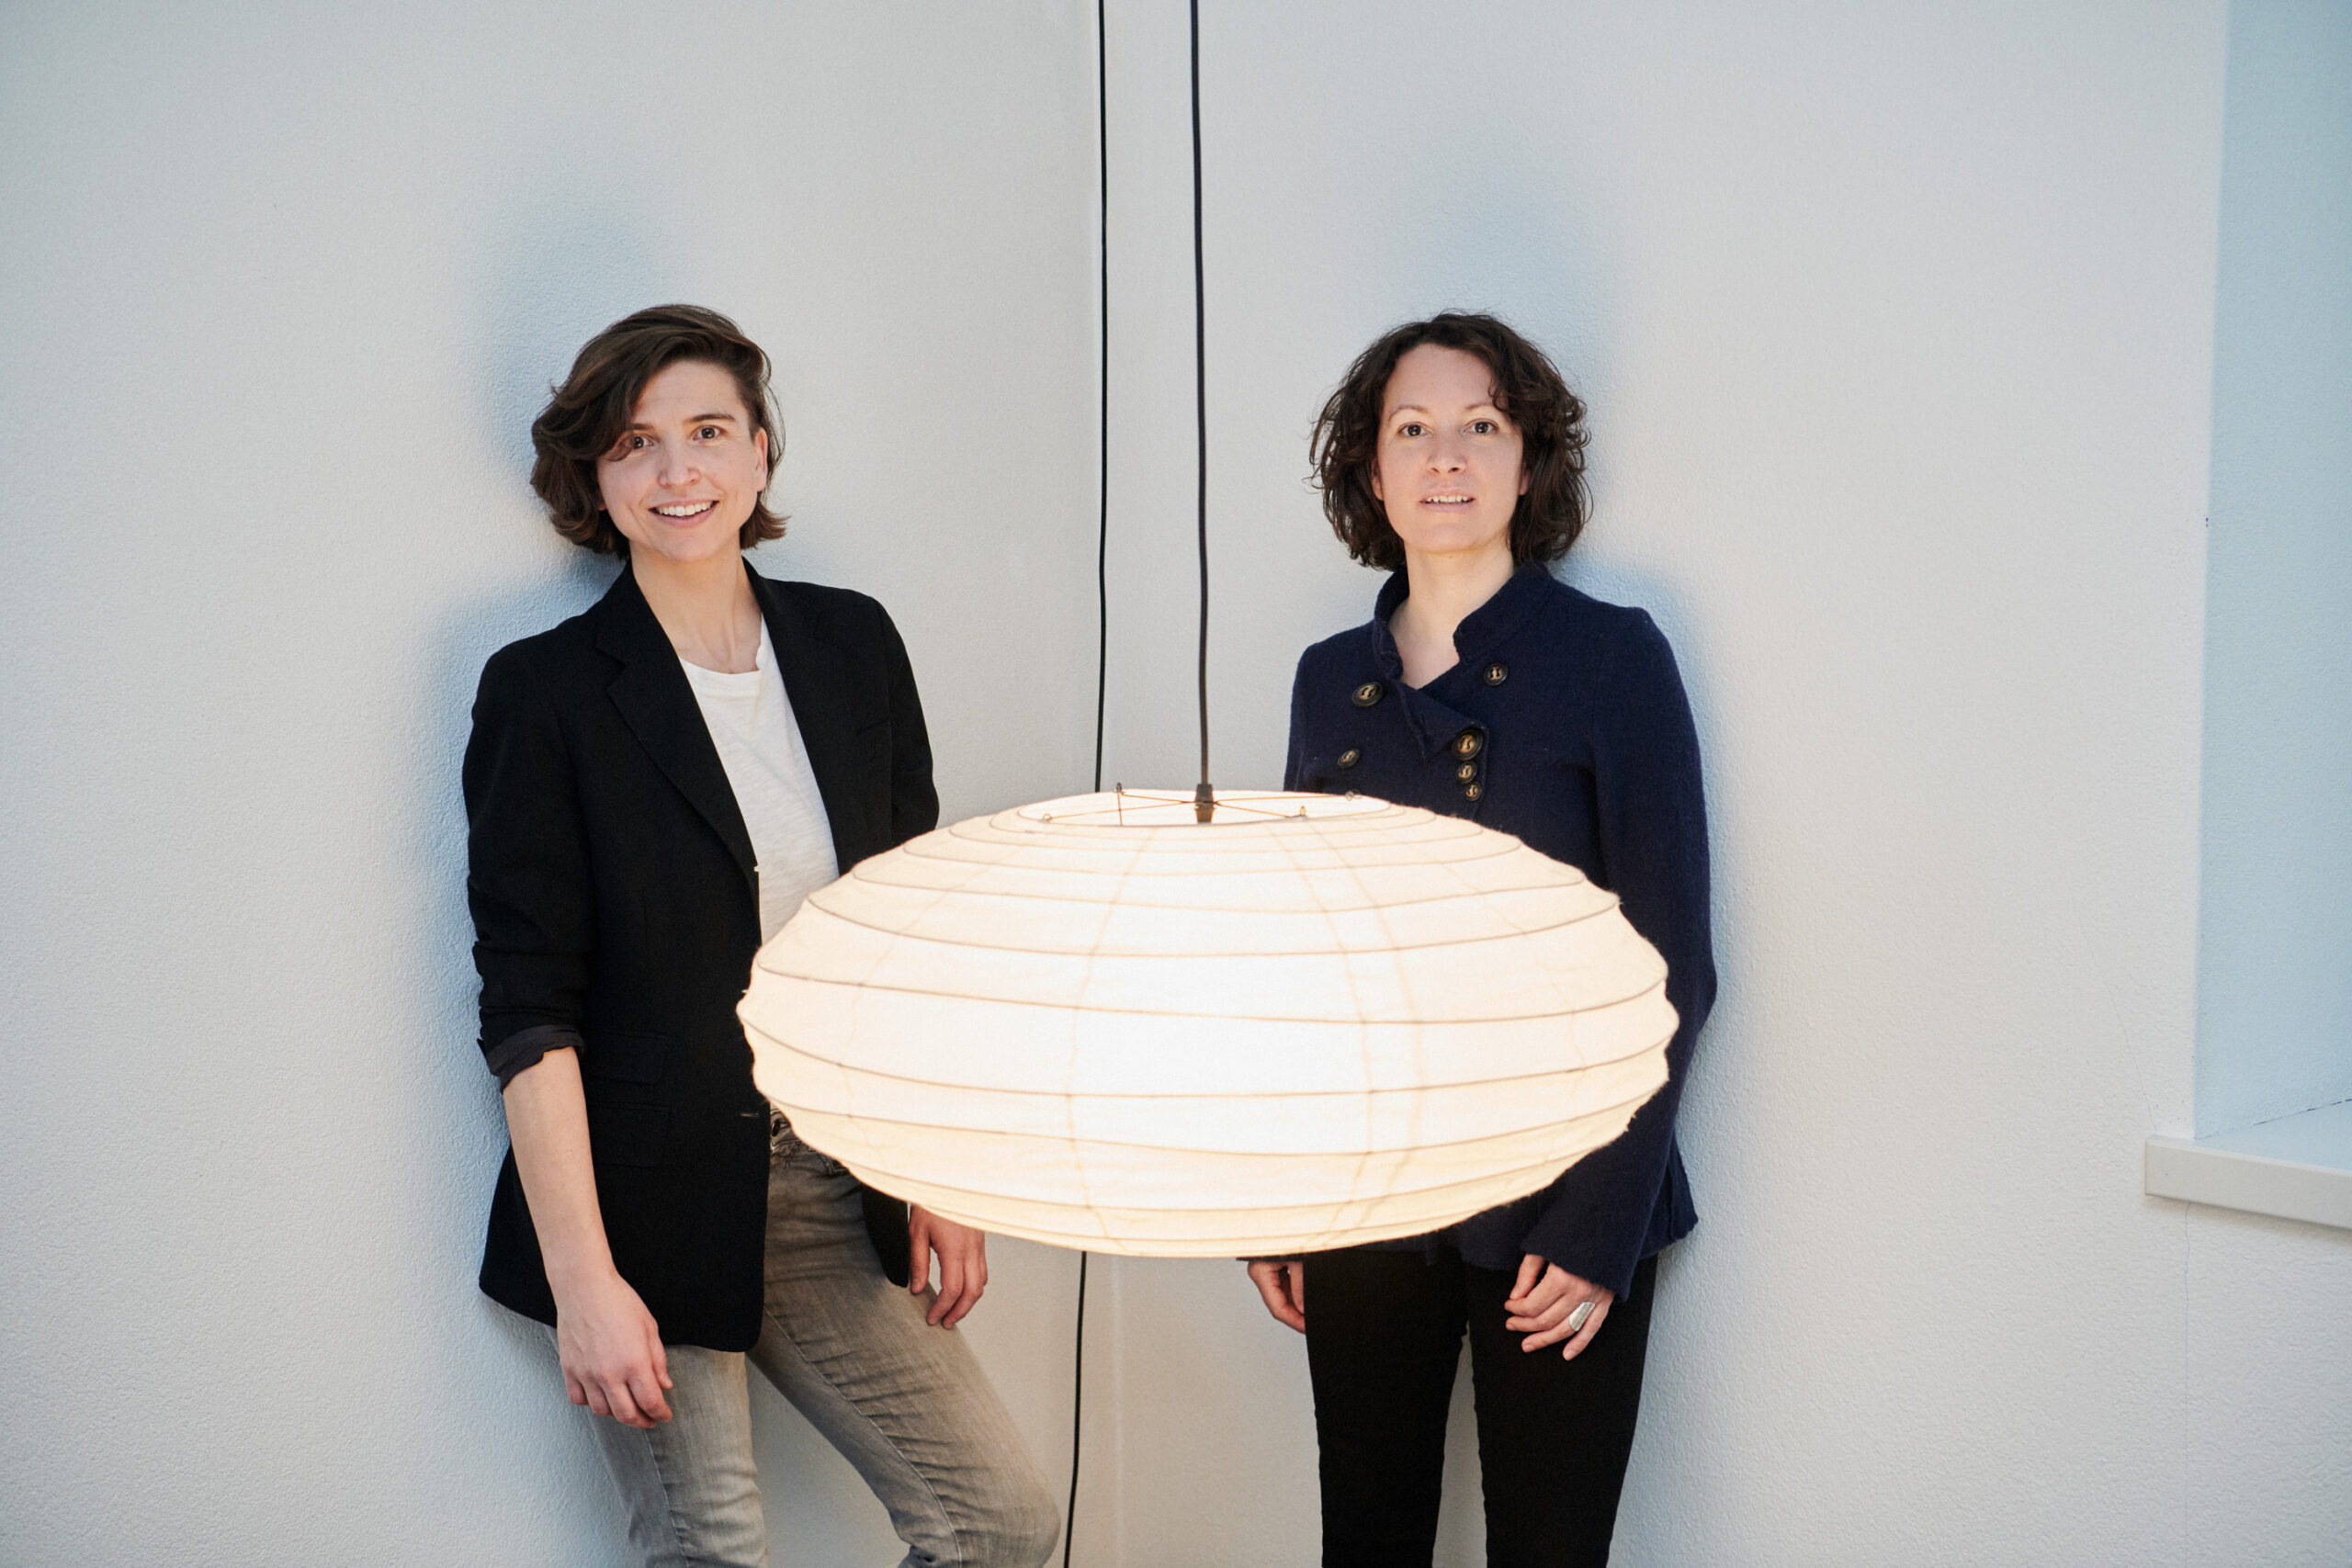 The co-founders of SPARK, Ariane Fischer and Serena Olgiati